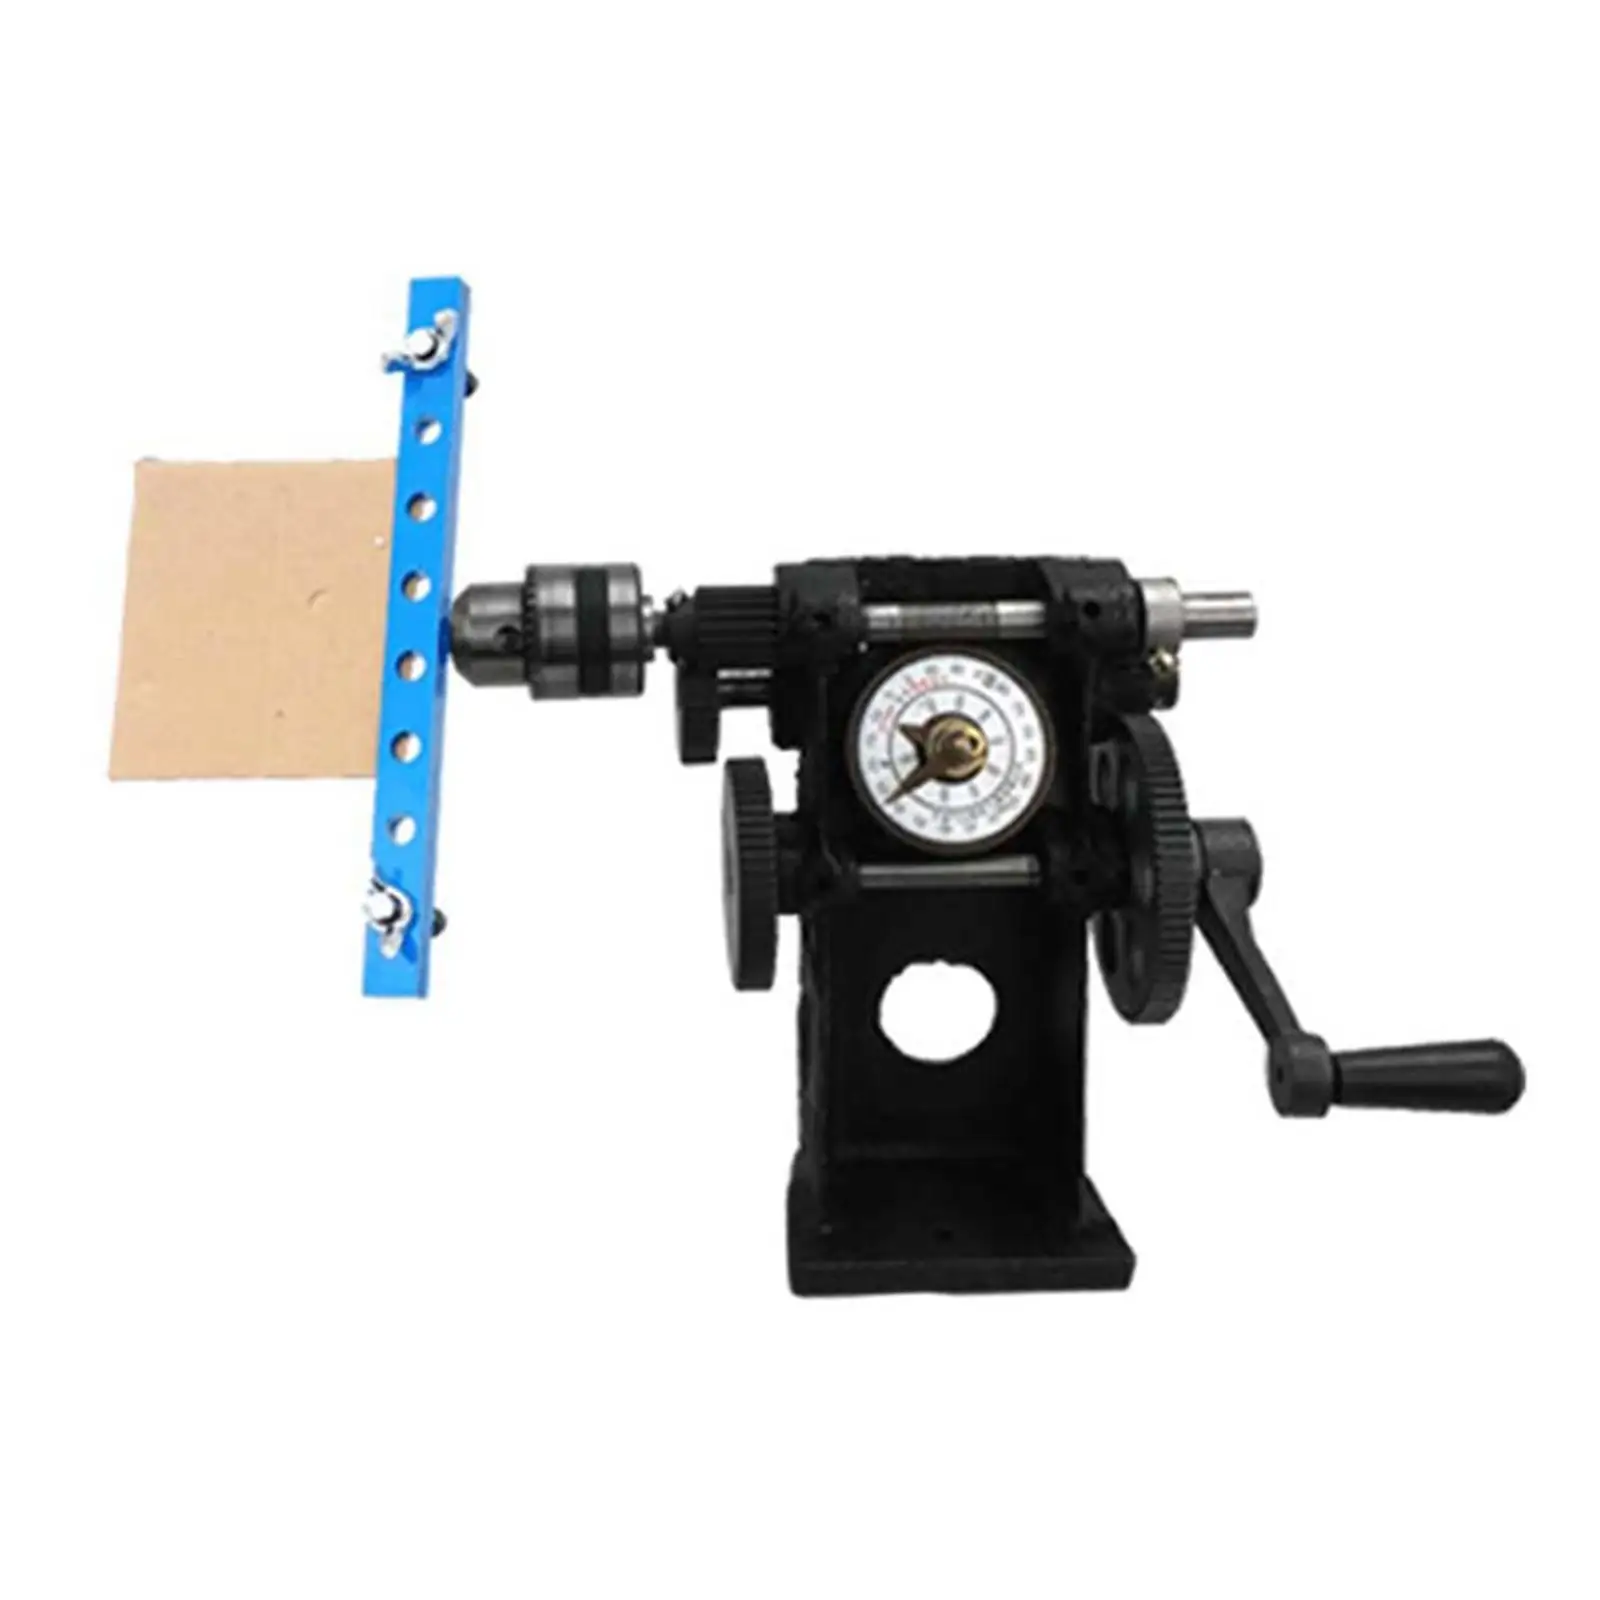 Manual Paper Winding Machine Manually Winding Machine 5mm~200mm Clamping Width Easy to Use Convenient for Sewing DIY Cards